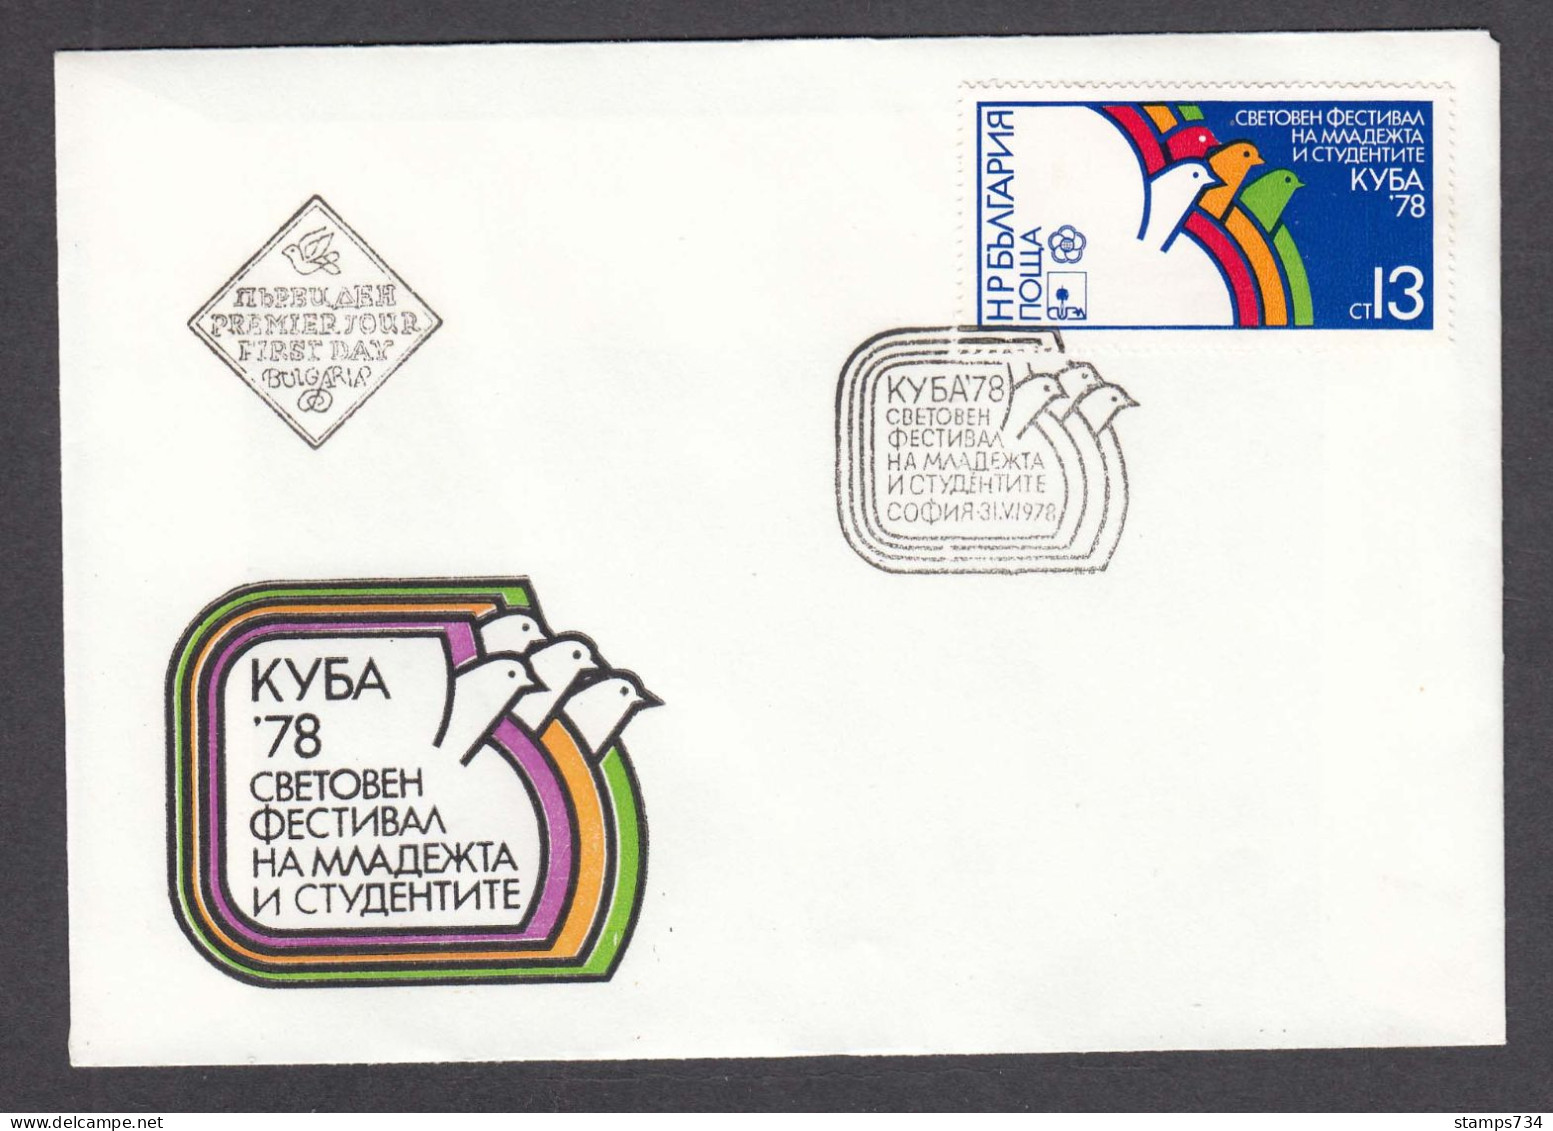 Bulgaria 1978 - World Festival Of Youth And Students In Havana, Mi-Nr. 2676, FDC - FDC